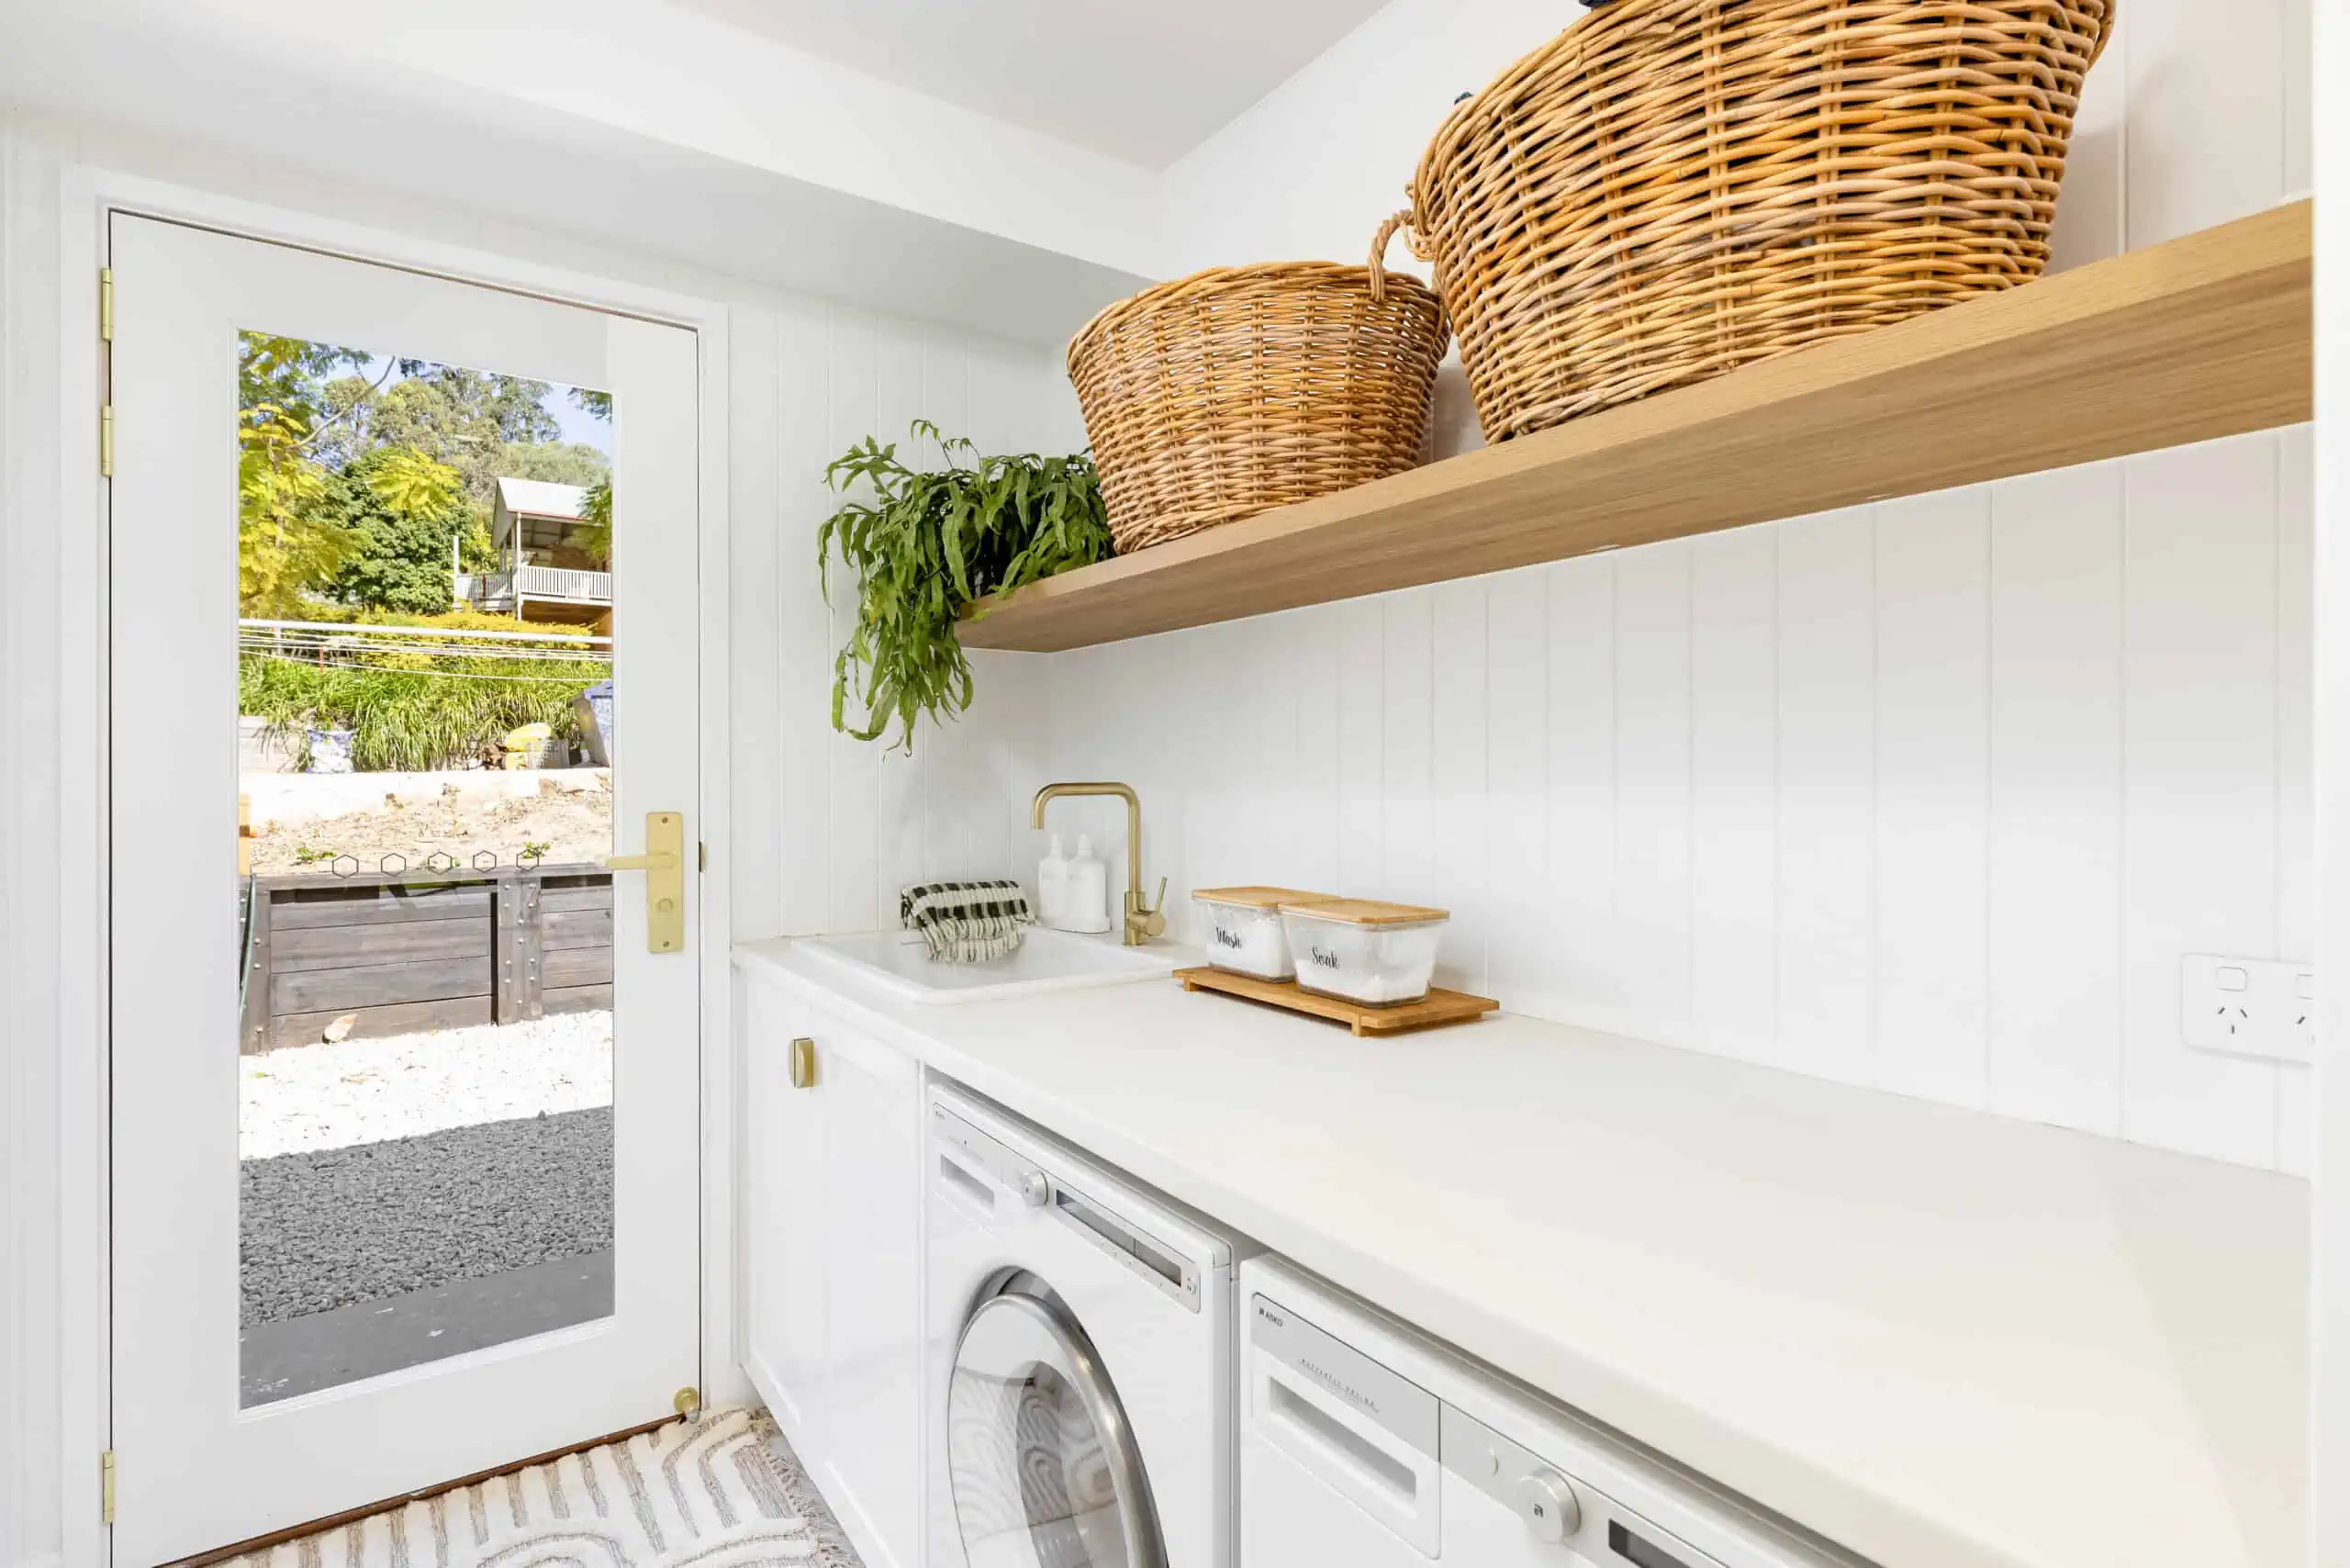 Modern white utility area with wooden shelves with baskets and a plant.